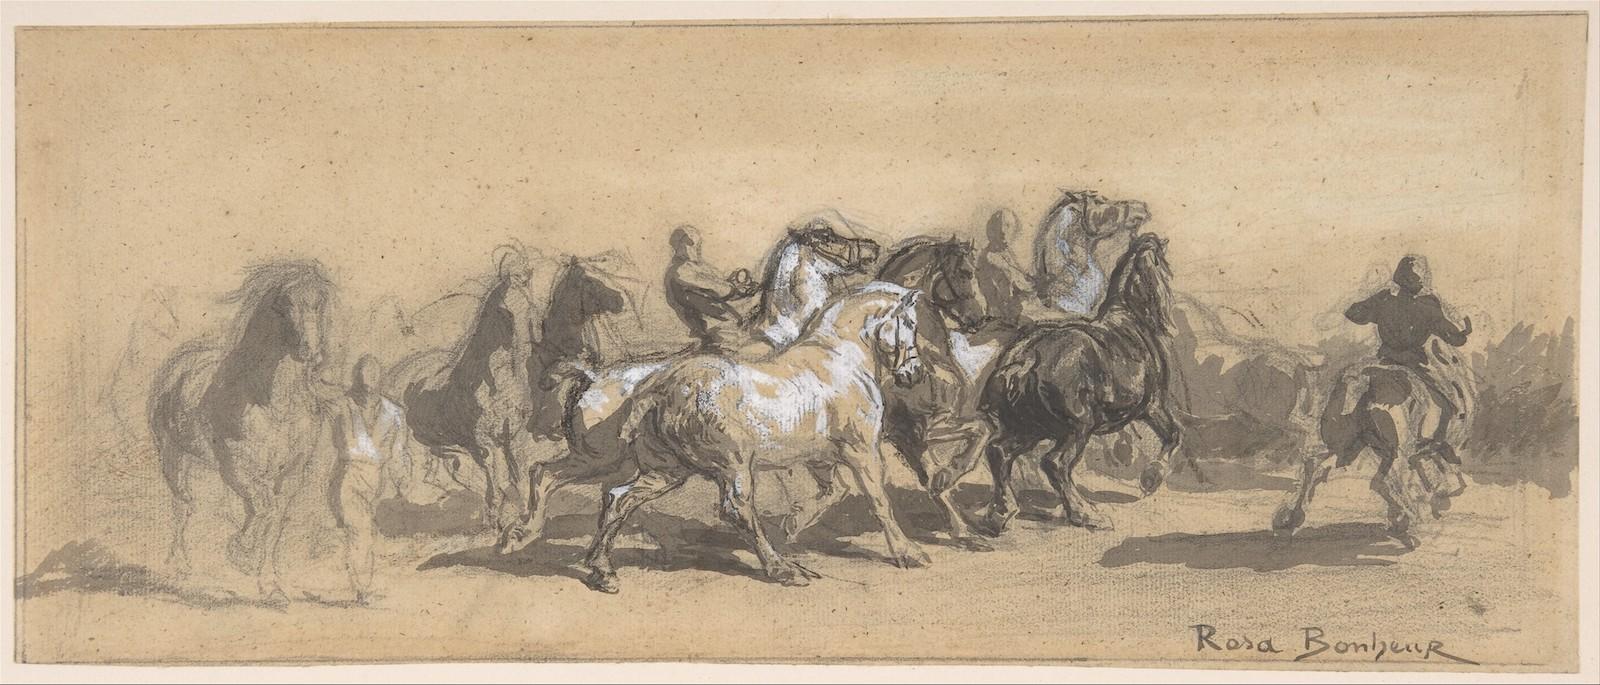 Rosa Bonheur, Study for The Horse Fair, 19th century. Black chalk, gray wash, heightened with white. 5 3:8 x 13 1:4 in. (13.7 x 33.7cm). Bequest of Edith H. Proskauer, 1975. 1975.319.2.